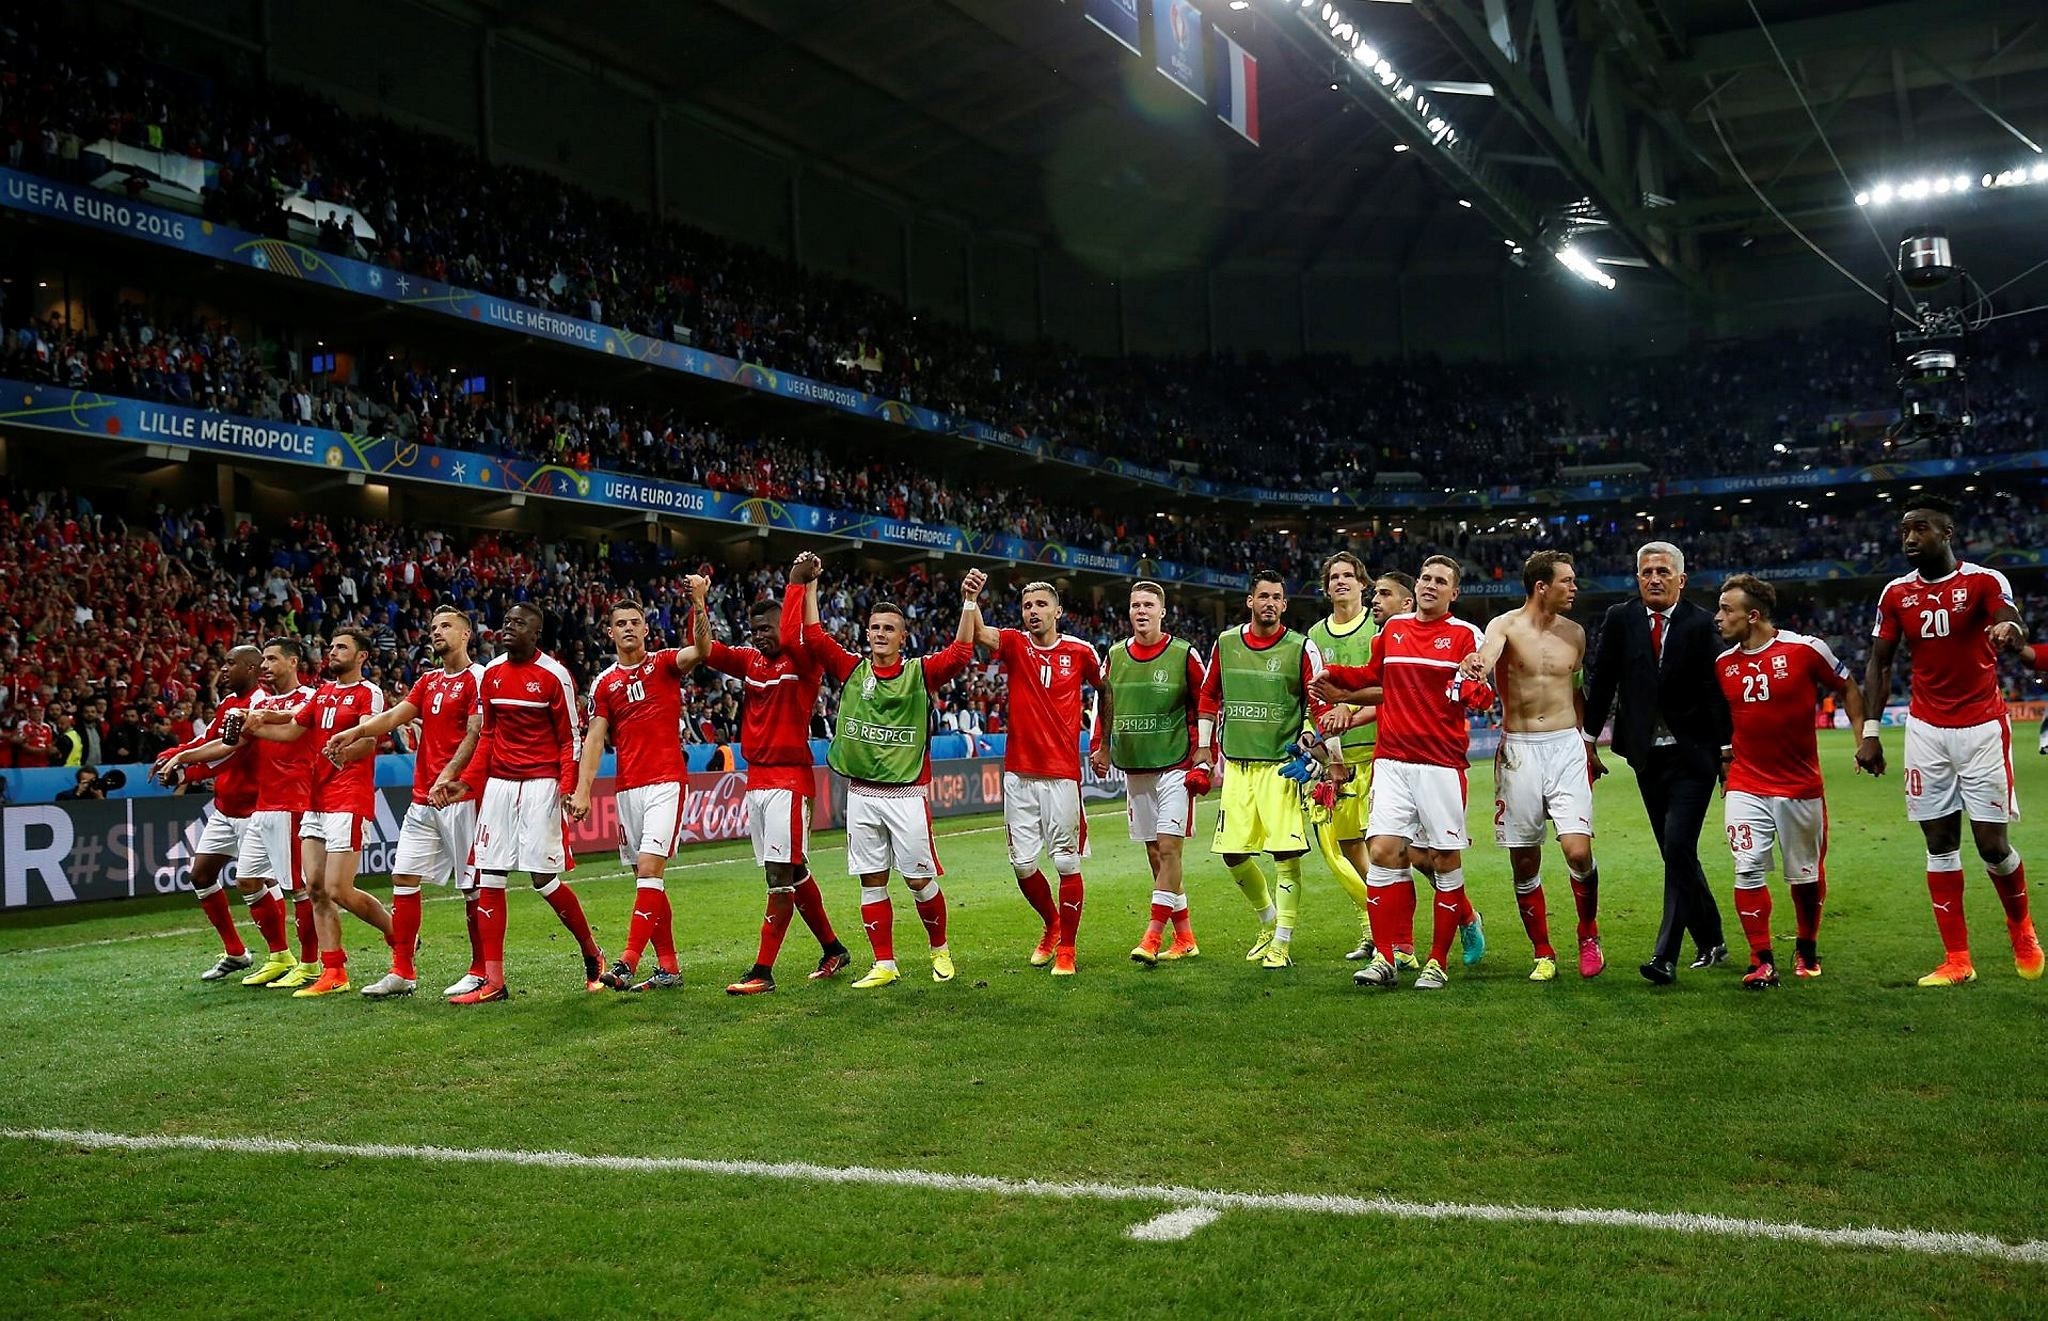   Players of Switzerland react after the UEFA EURO 2016 group A preliminary round match between Switzerland and France at Stade Pierre Mauroy in Lille Metropole, France, 19 June 2016. (EPA Photo)